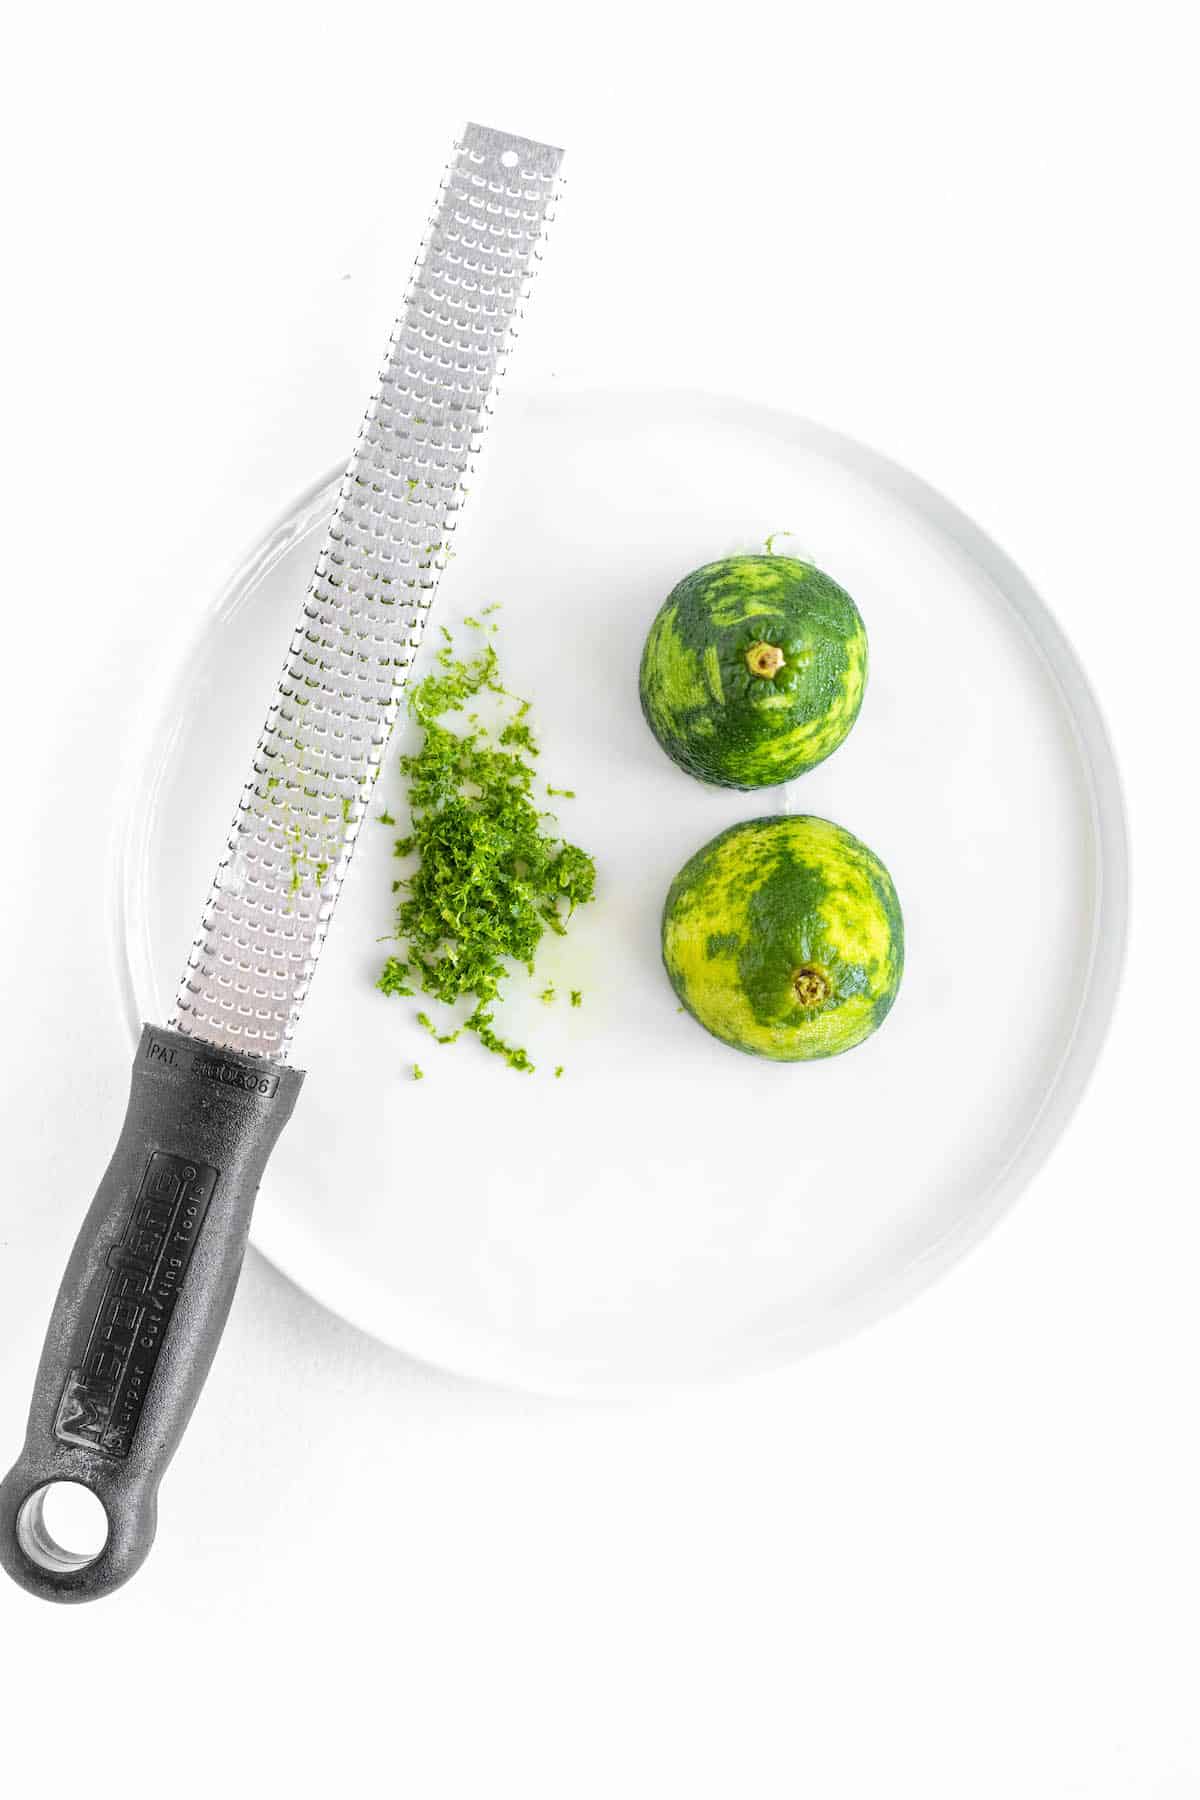 two lime halves with a microplane grater and a pile of lime zest